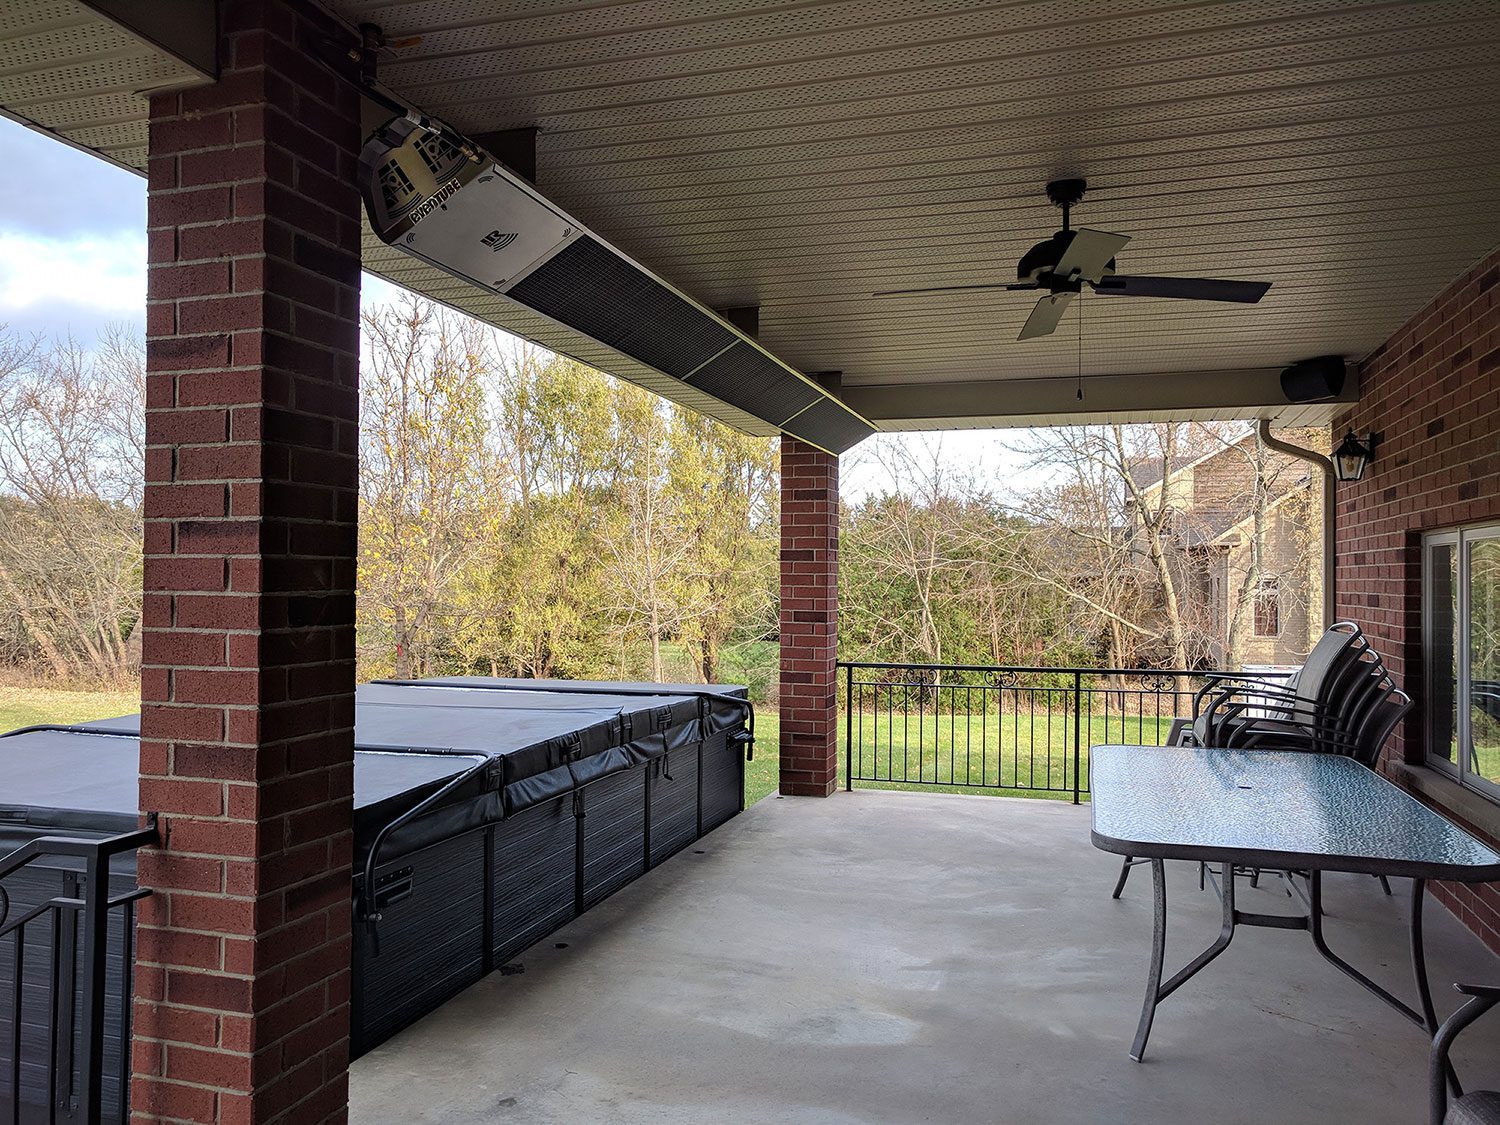 residential outdoor heater mounted on the ceiling